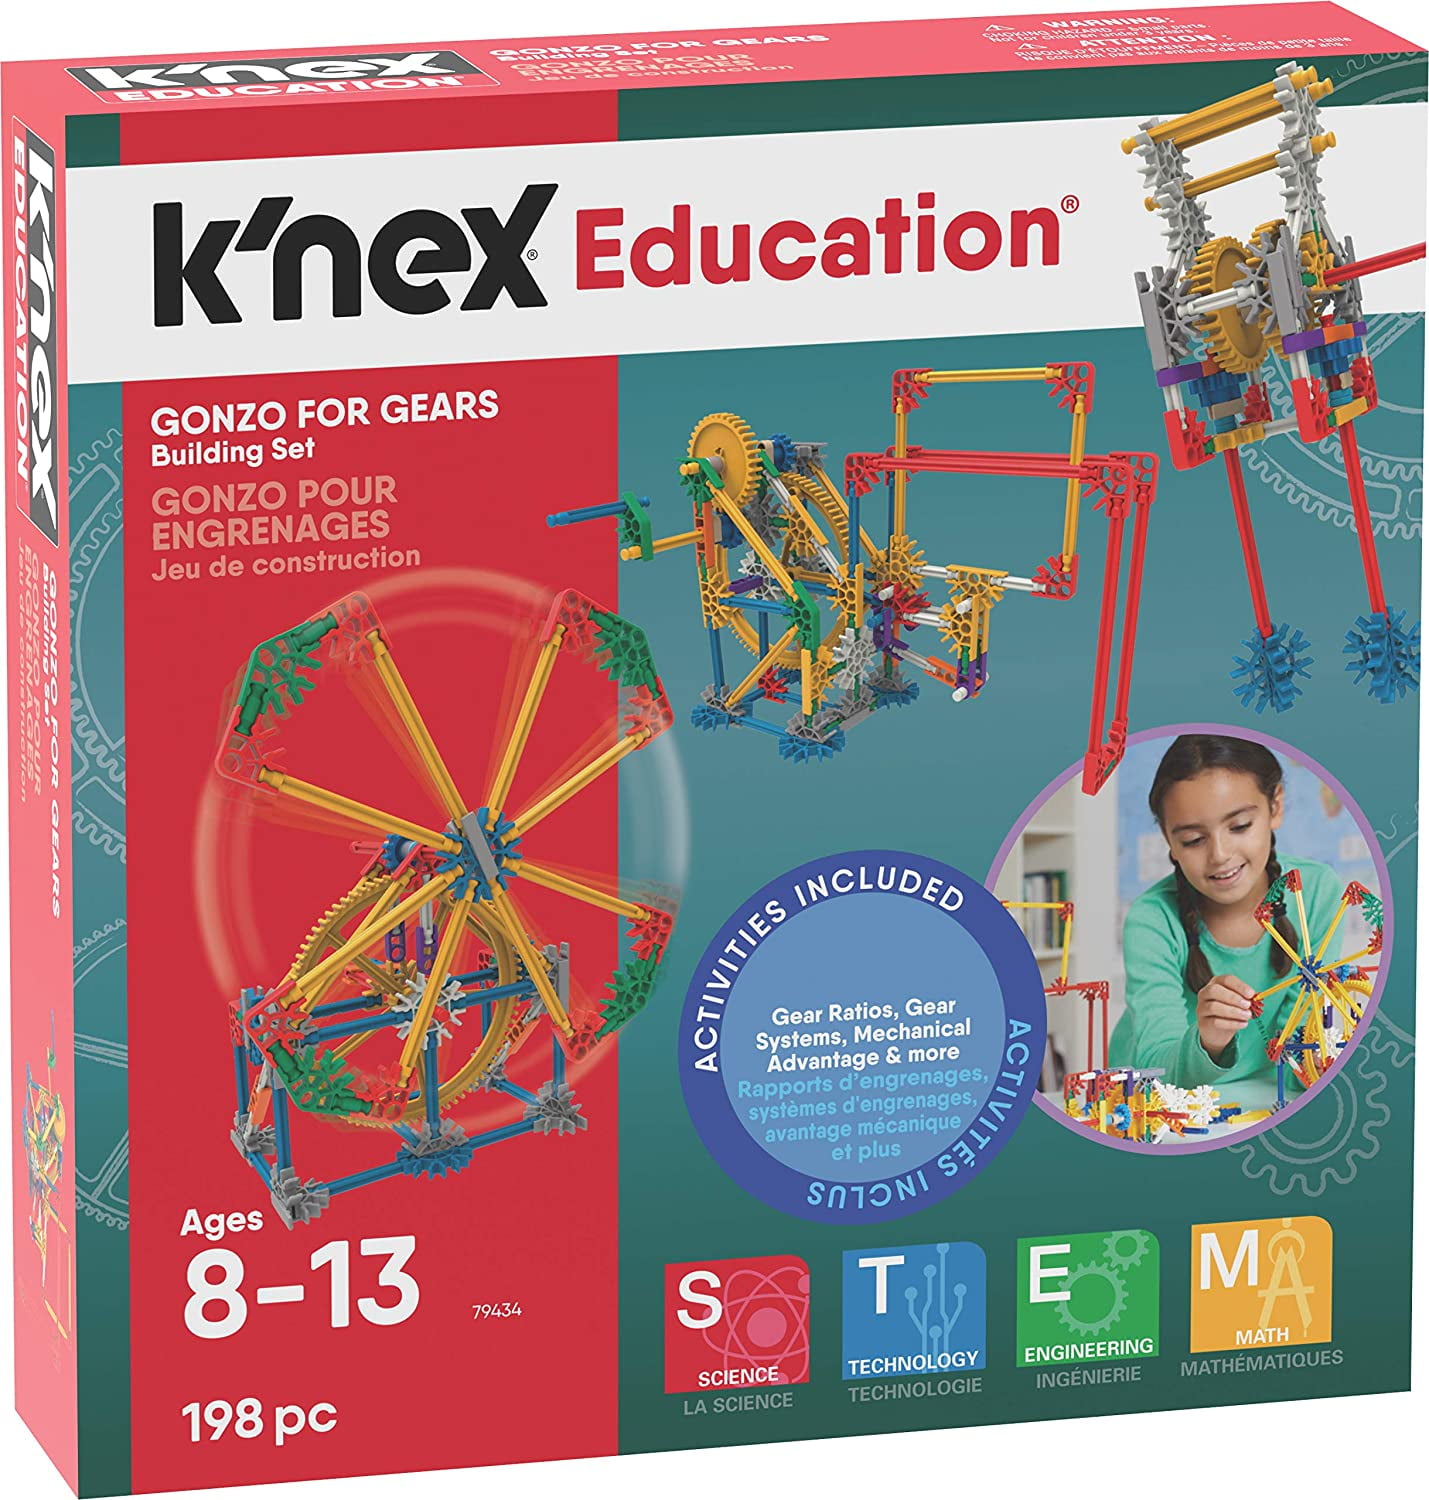 NEW K'NEX Education Gonzo For Gears Building Set 198 pc 79434 